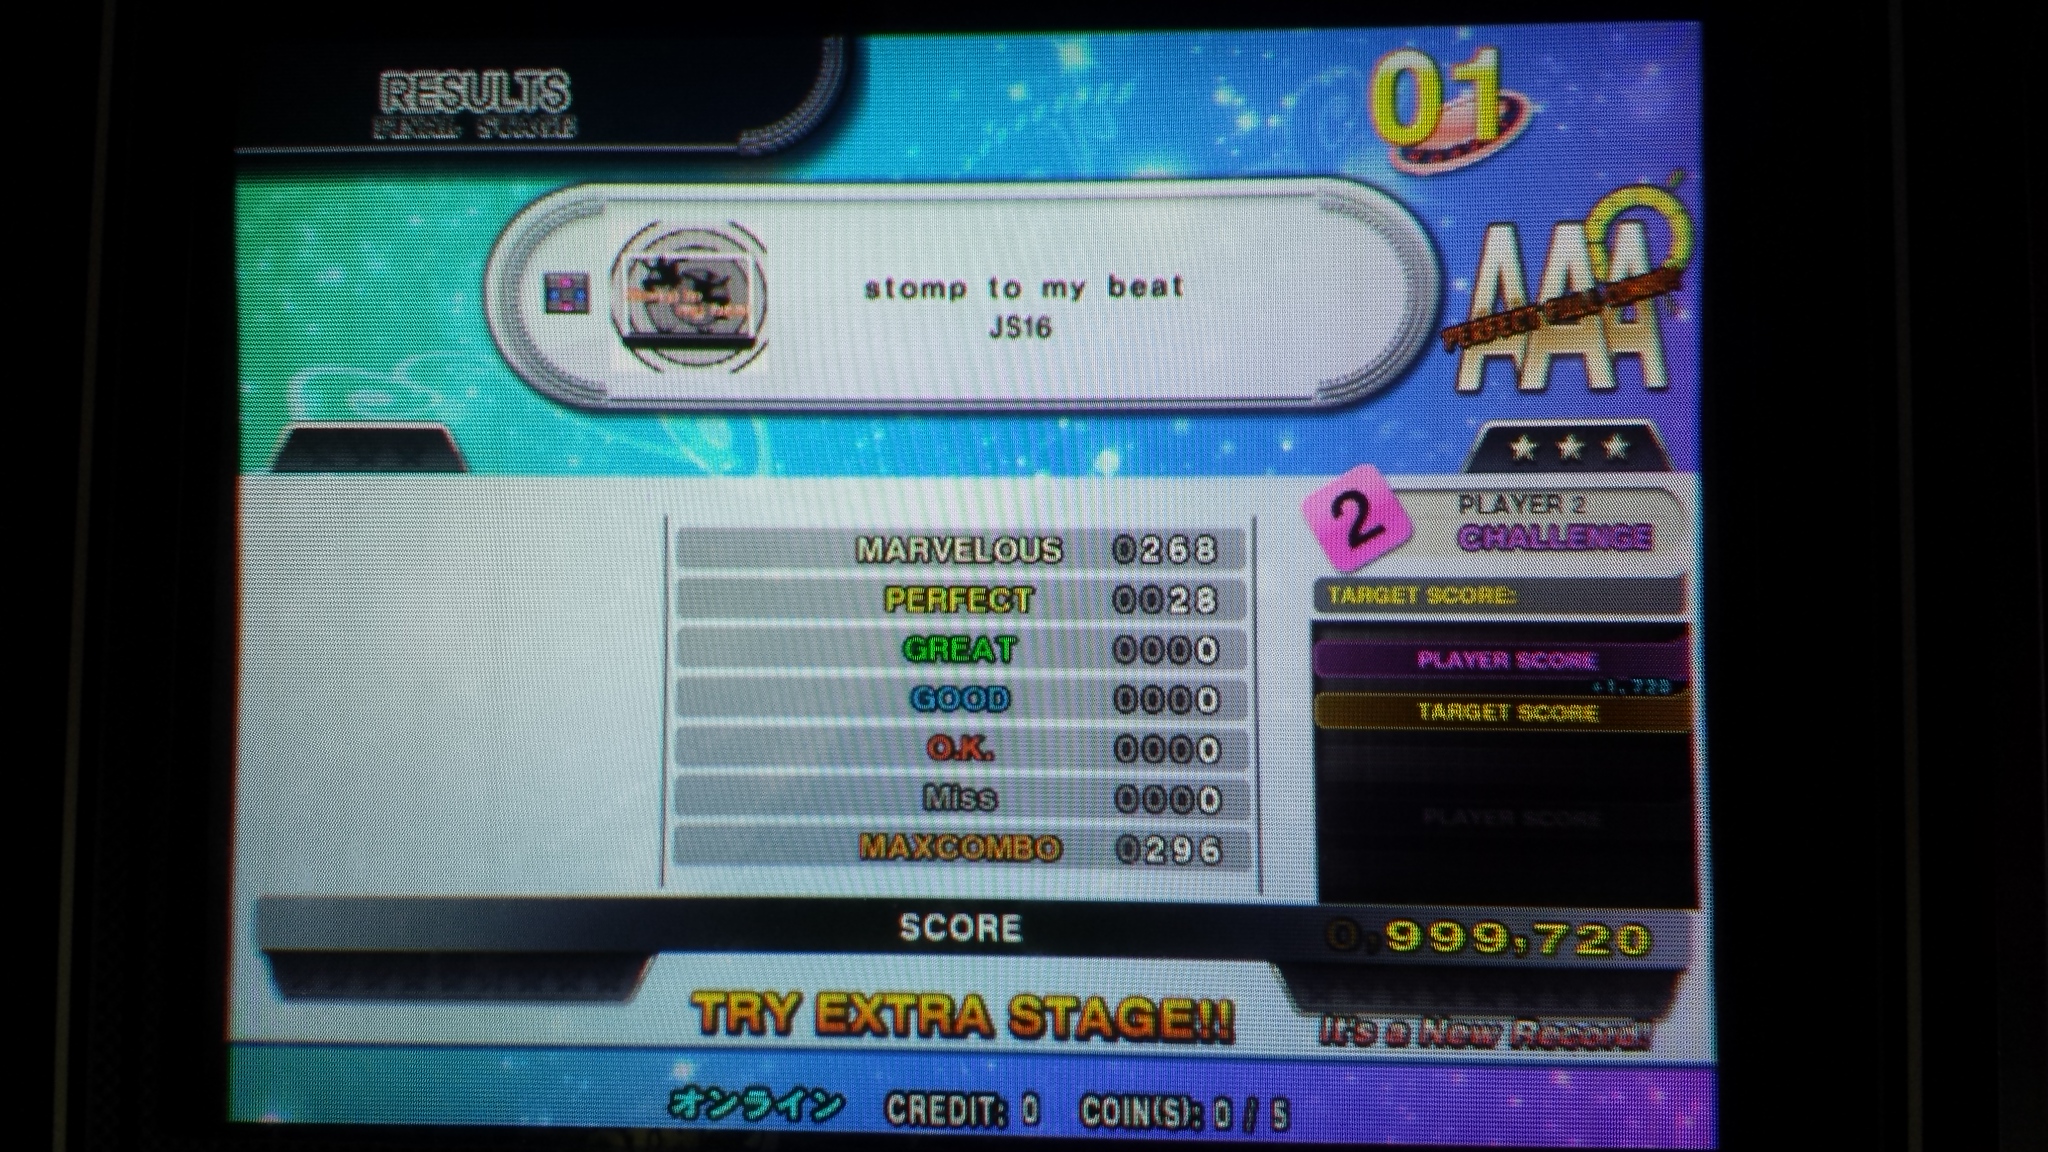 Stomp to my beat CSP DDR 2013 AC